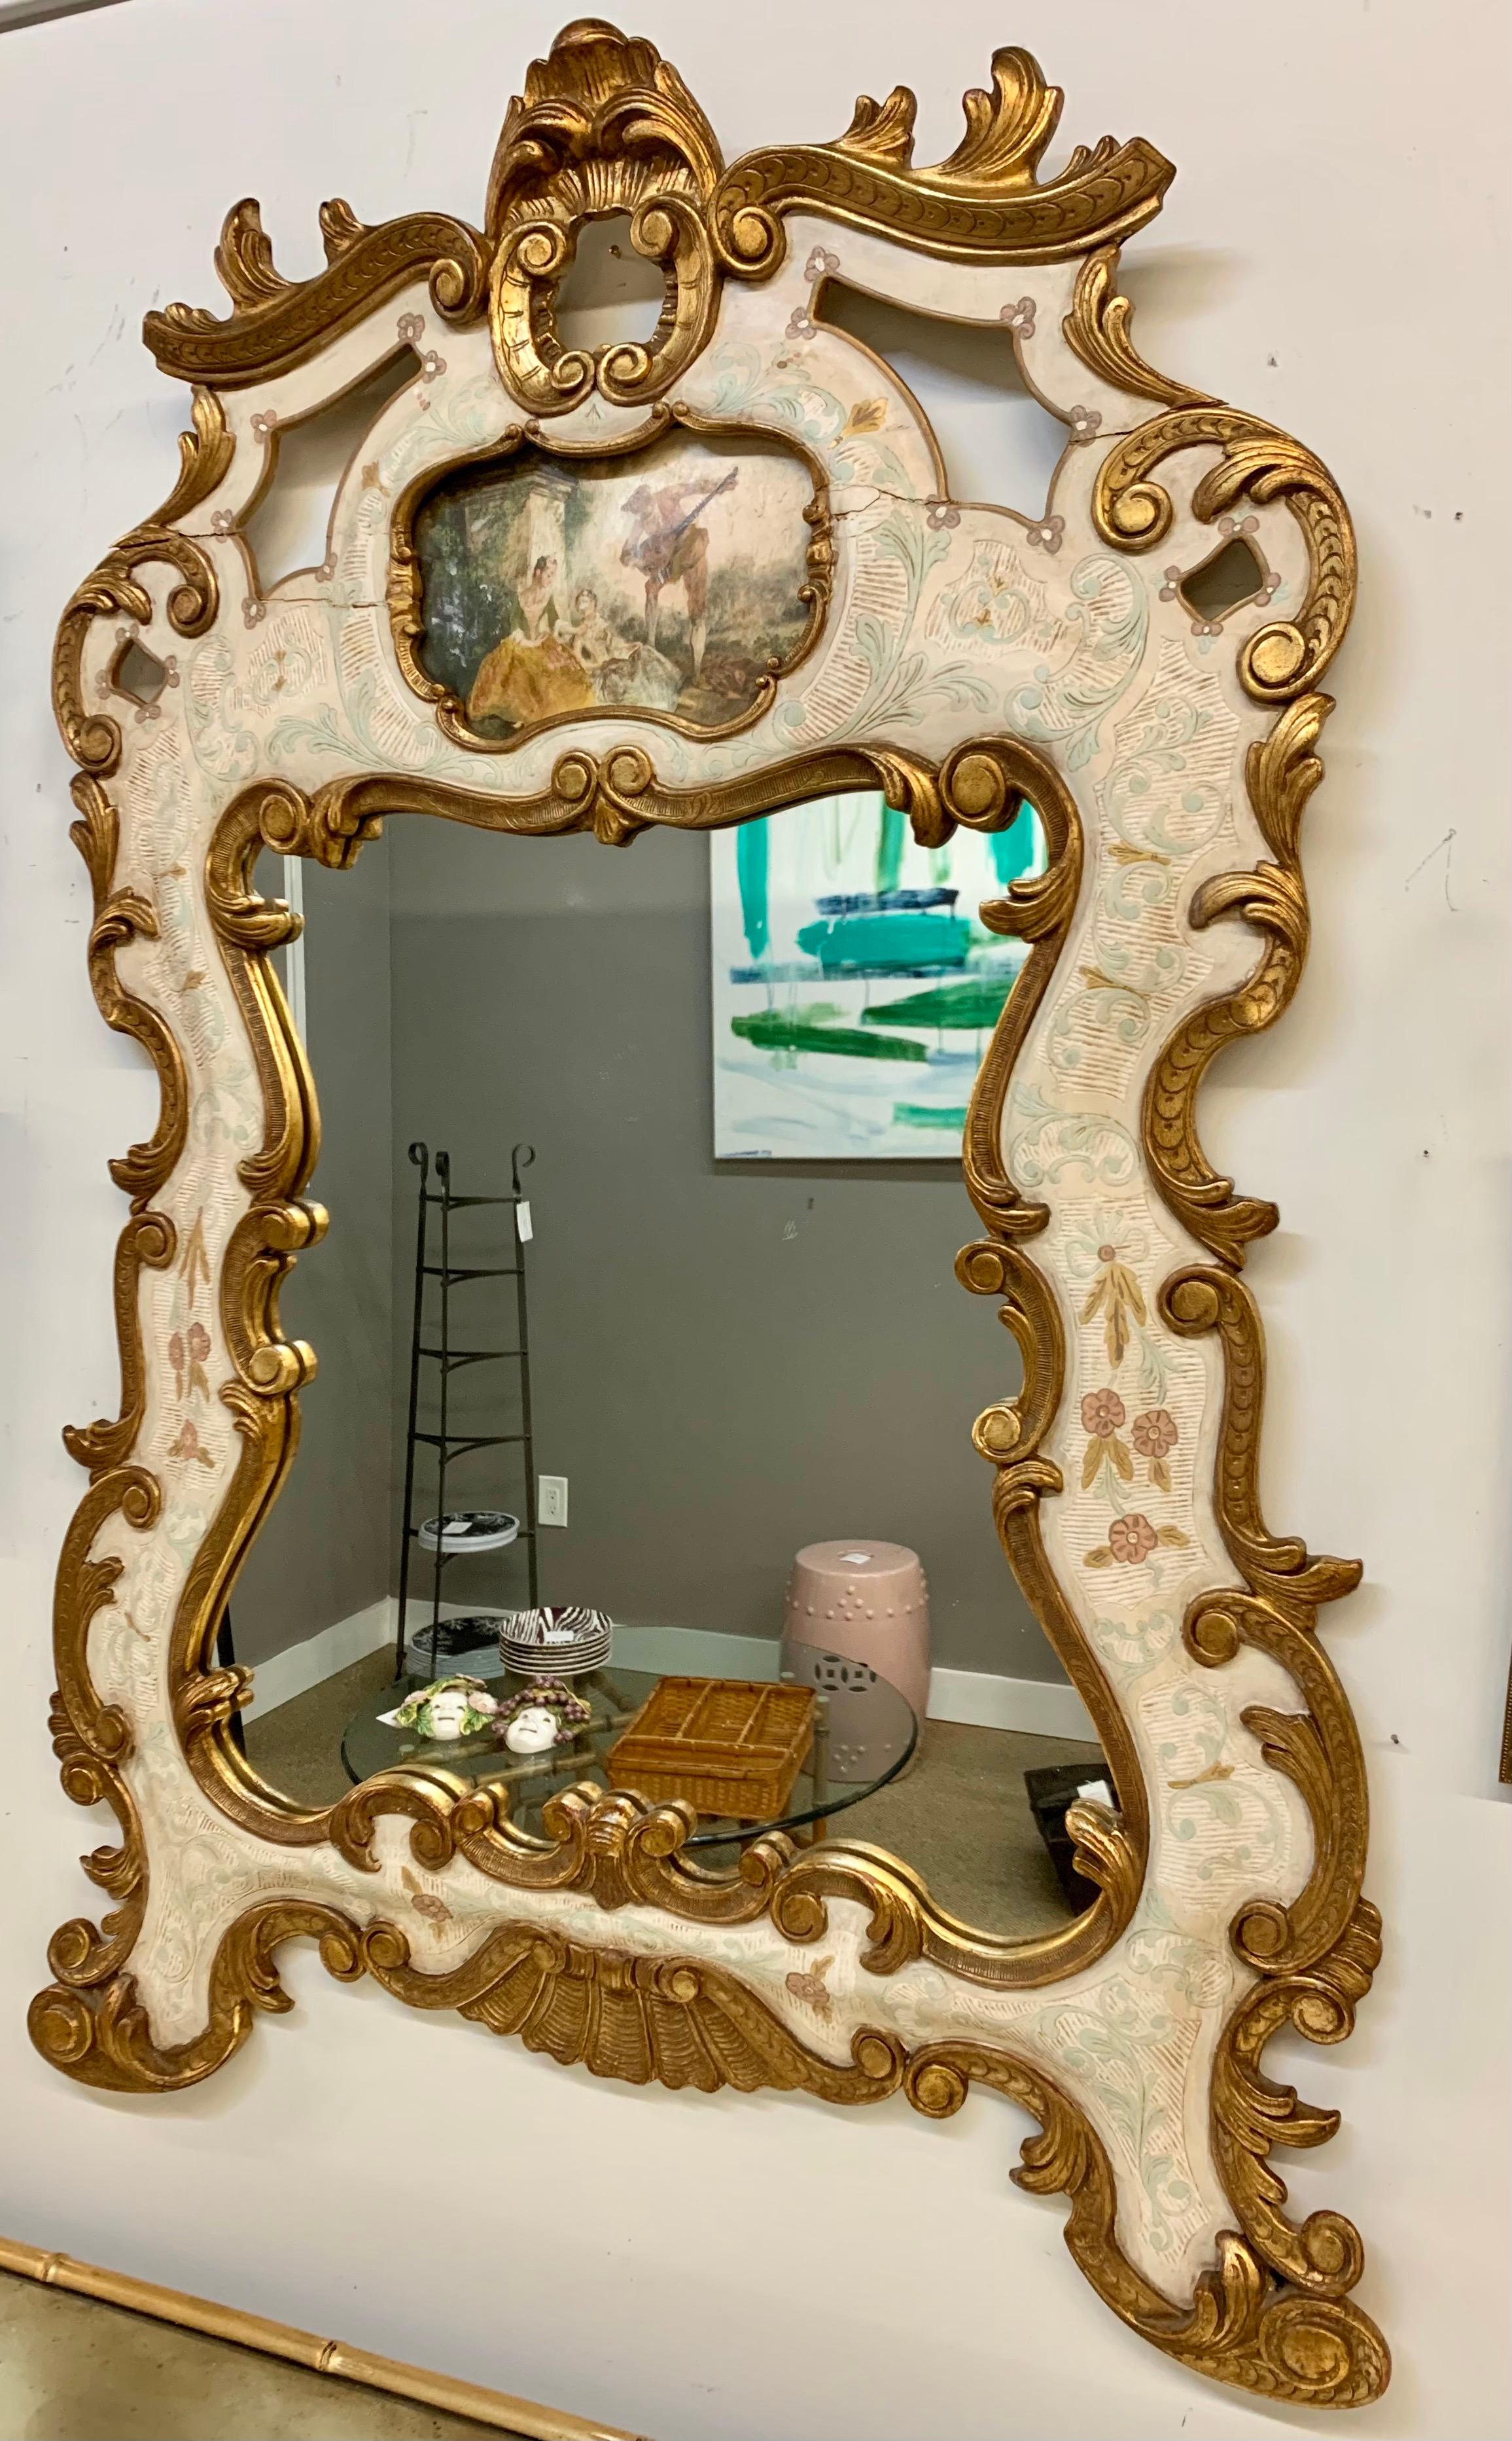 Made of resin and giltwood, this Venetian Trumeau mirror is guaranteed to set your home apart,
circa 1950s-1960s with age appropriate wear including some fractures in the resin, see pics.
Now, more than ever, home is where the heart is.